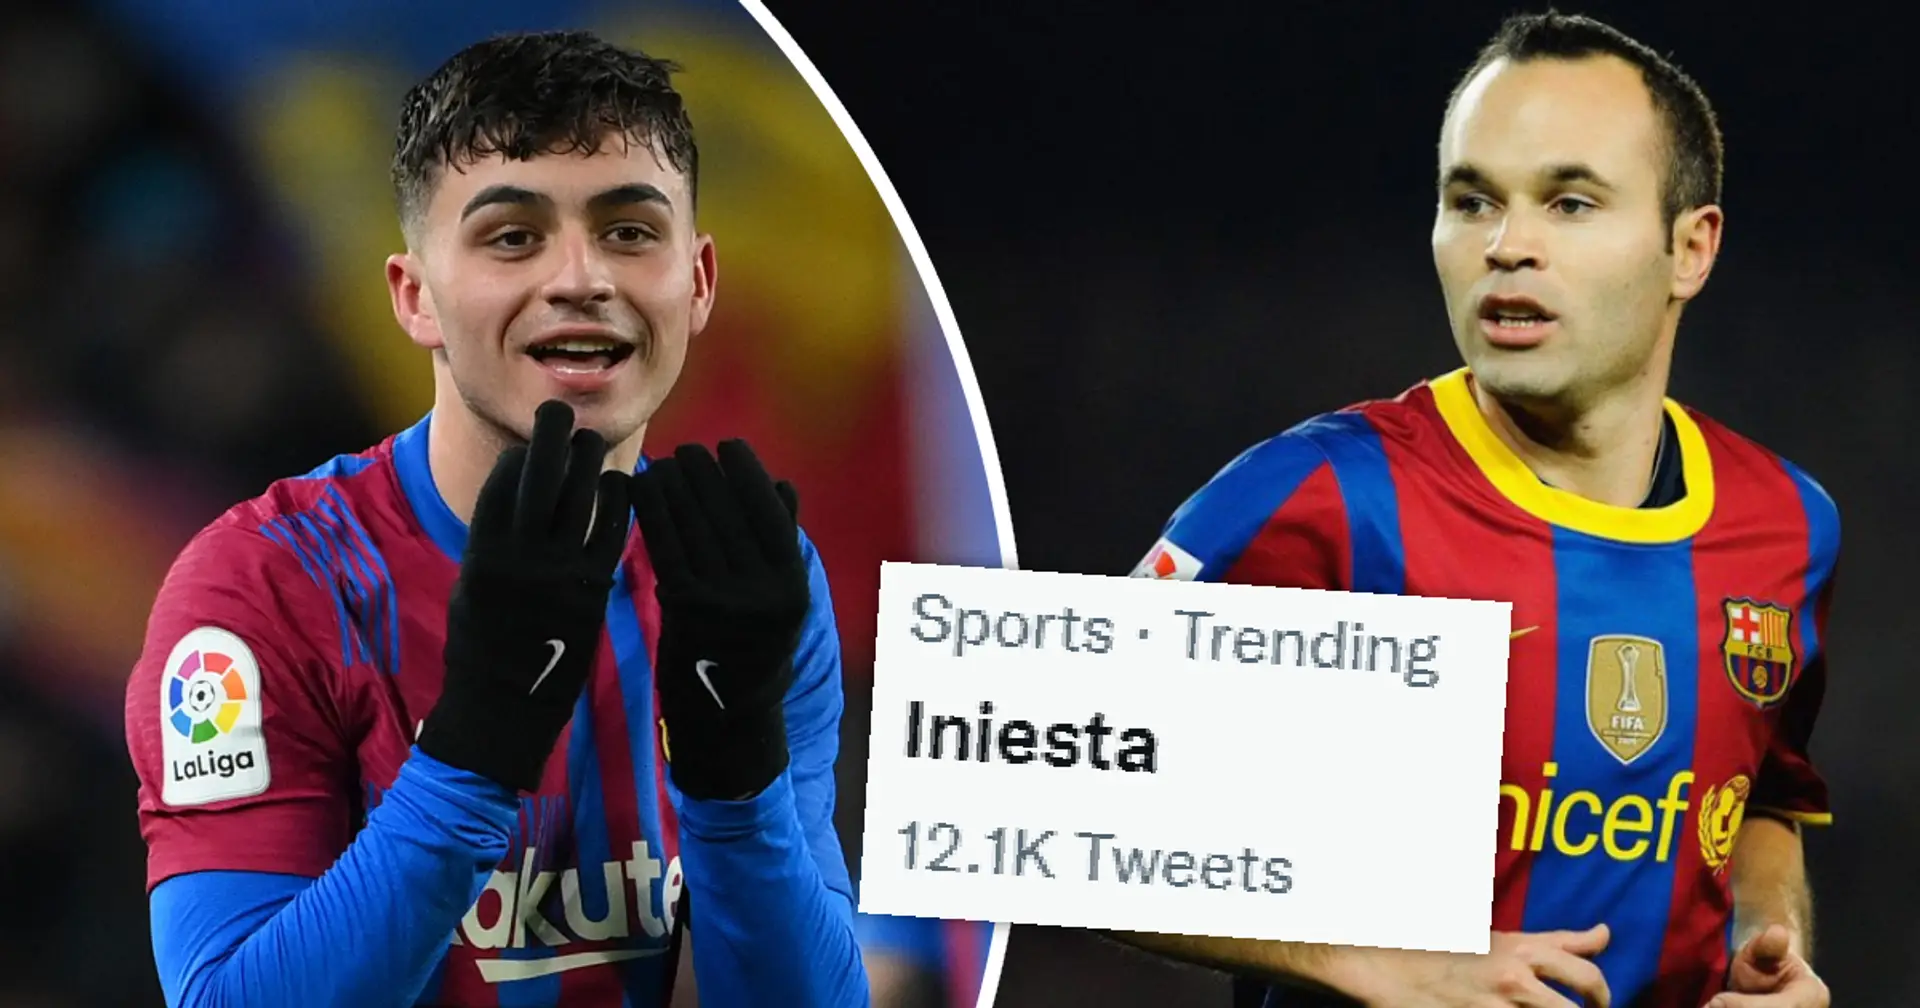 Iniesta trending on Twitter: here is why and what Pedri has to do with it